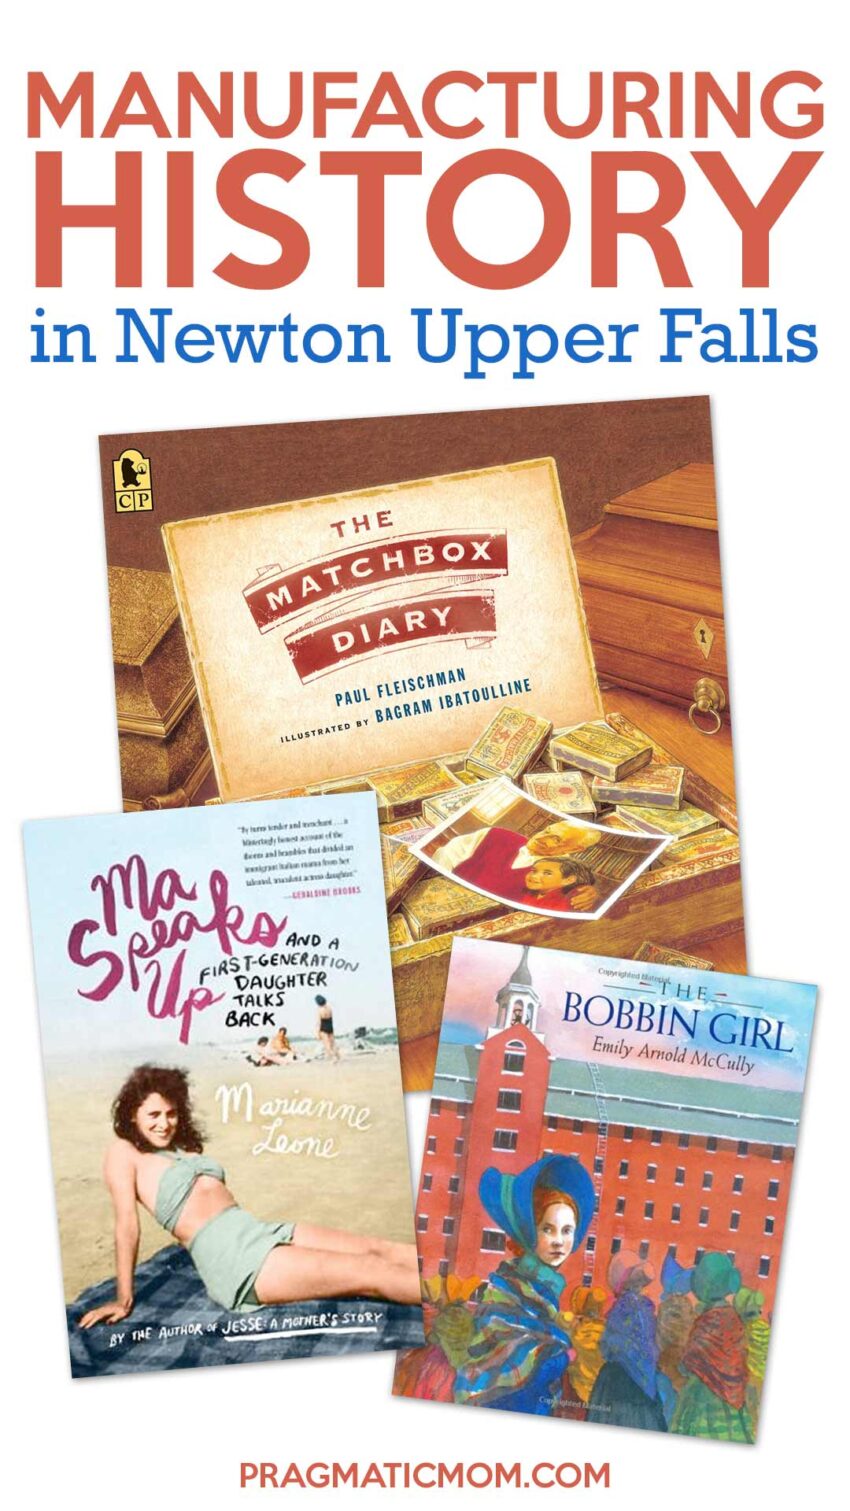 Manufacturing History in Newton Upper Falls & Book List